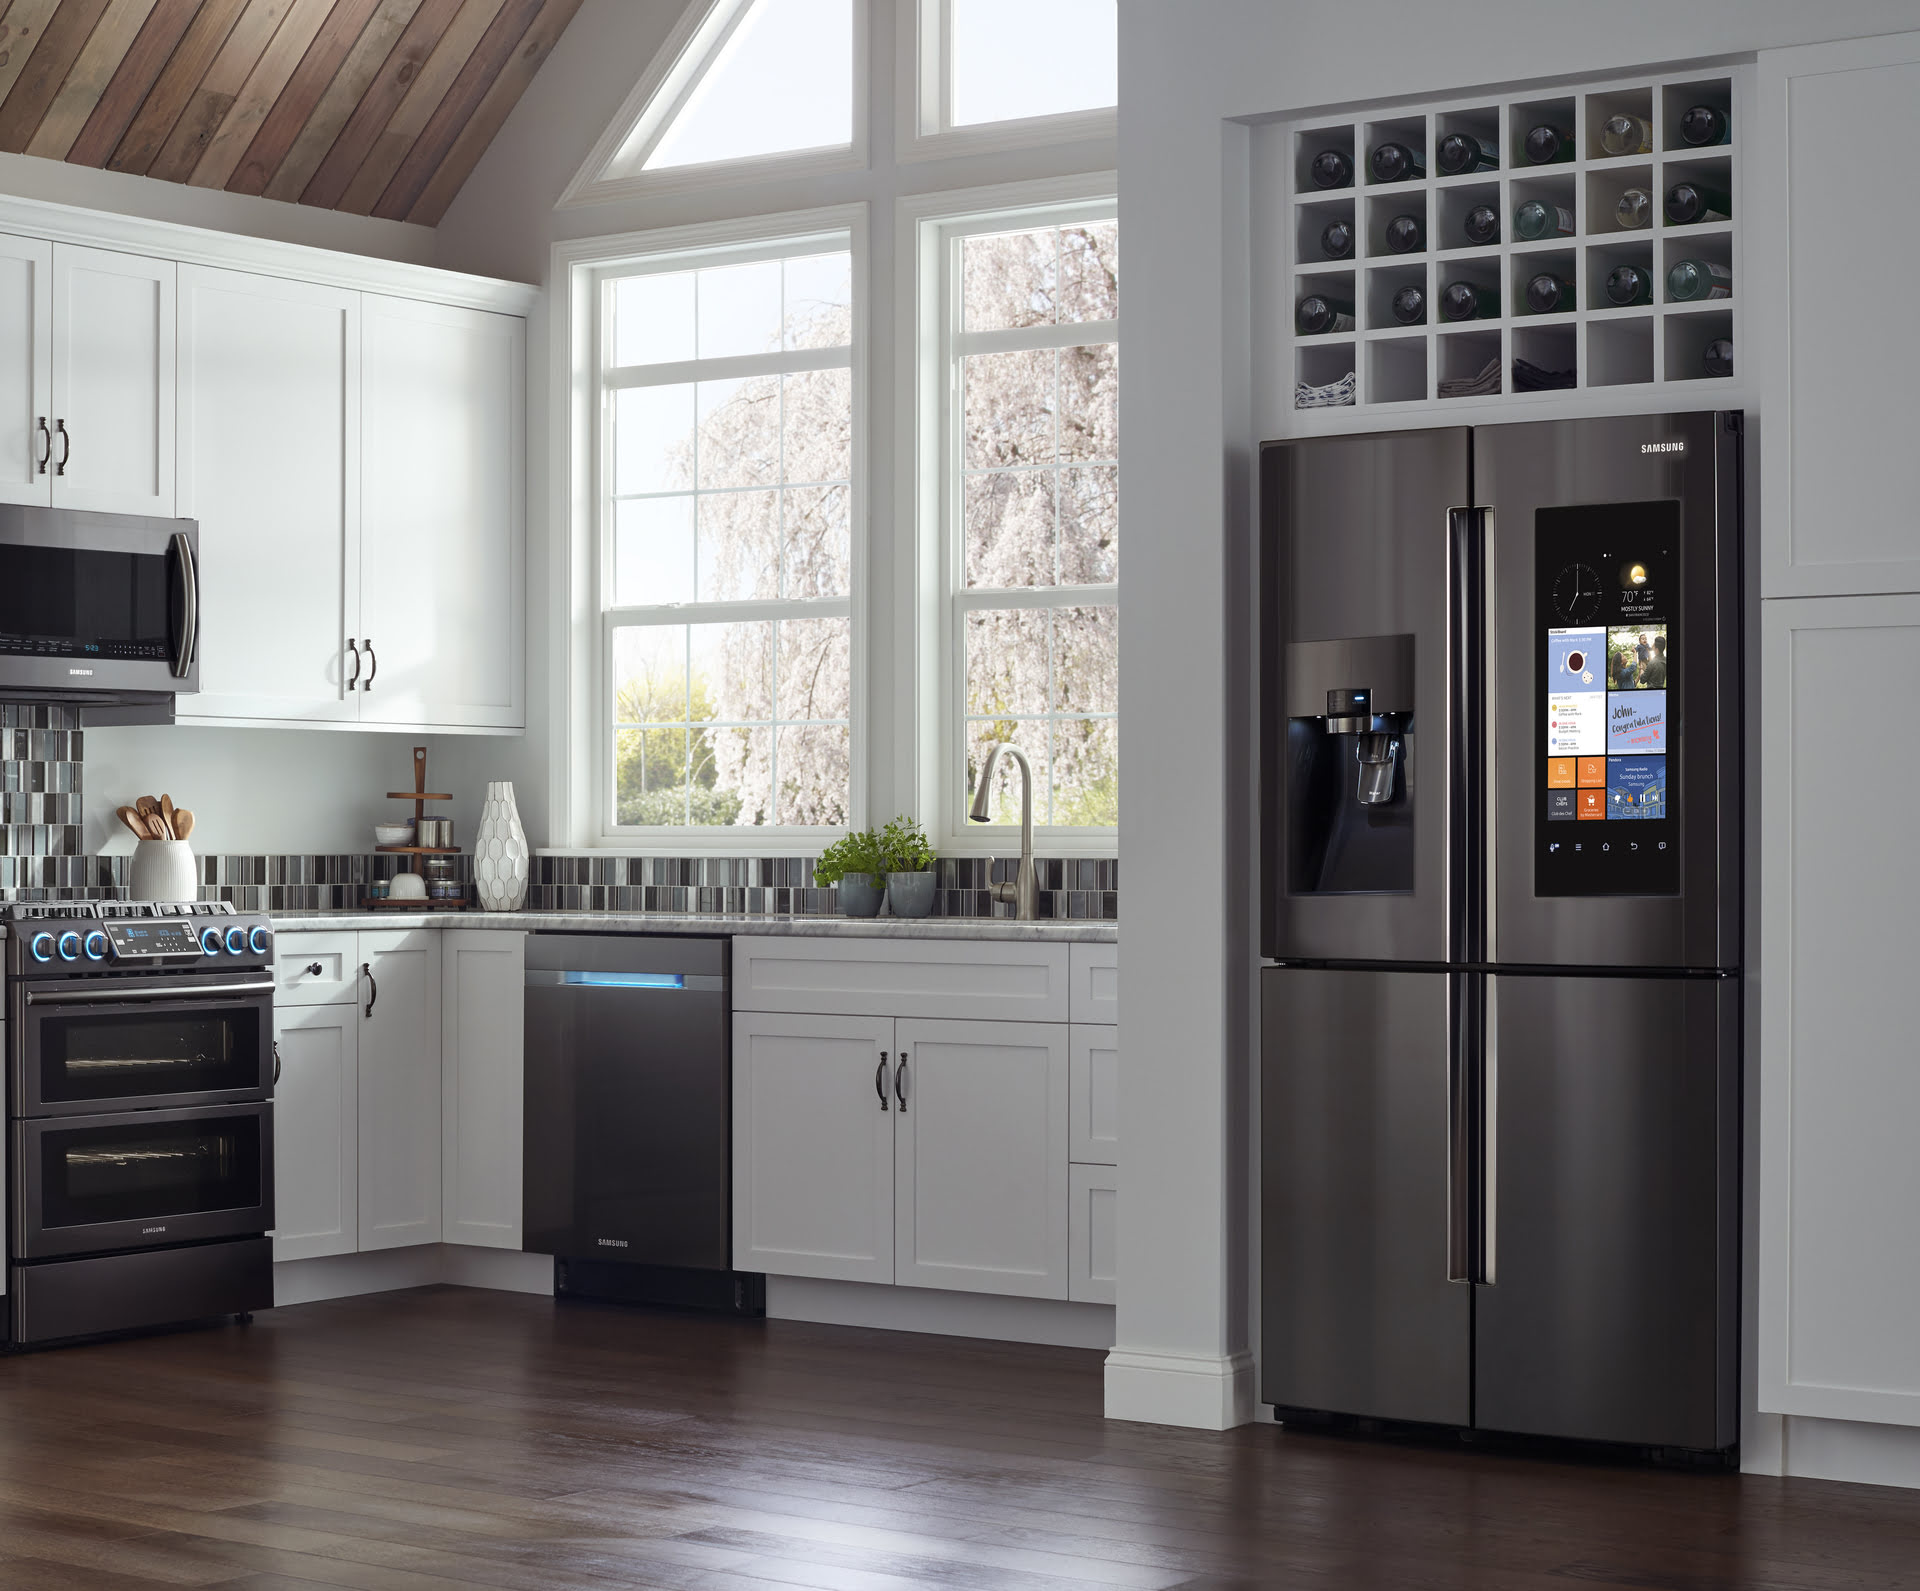 How To Fix The Error Code BE For Samsung Refrigerator